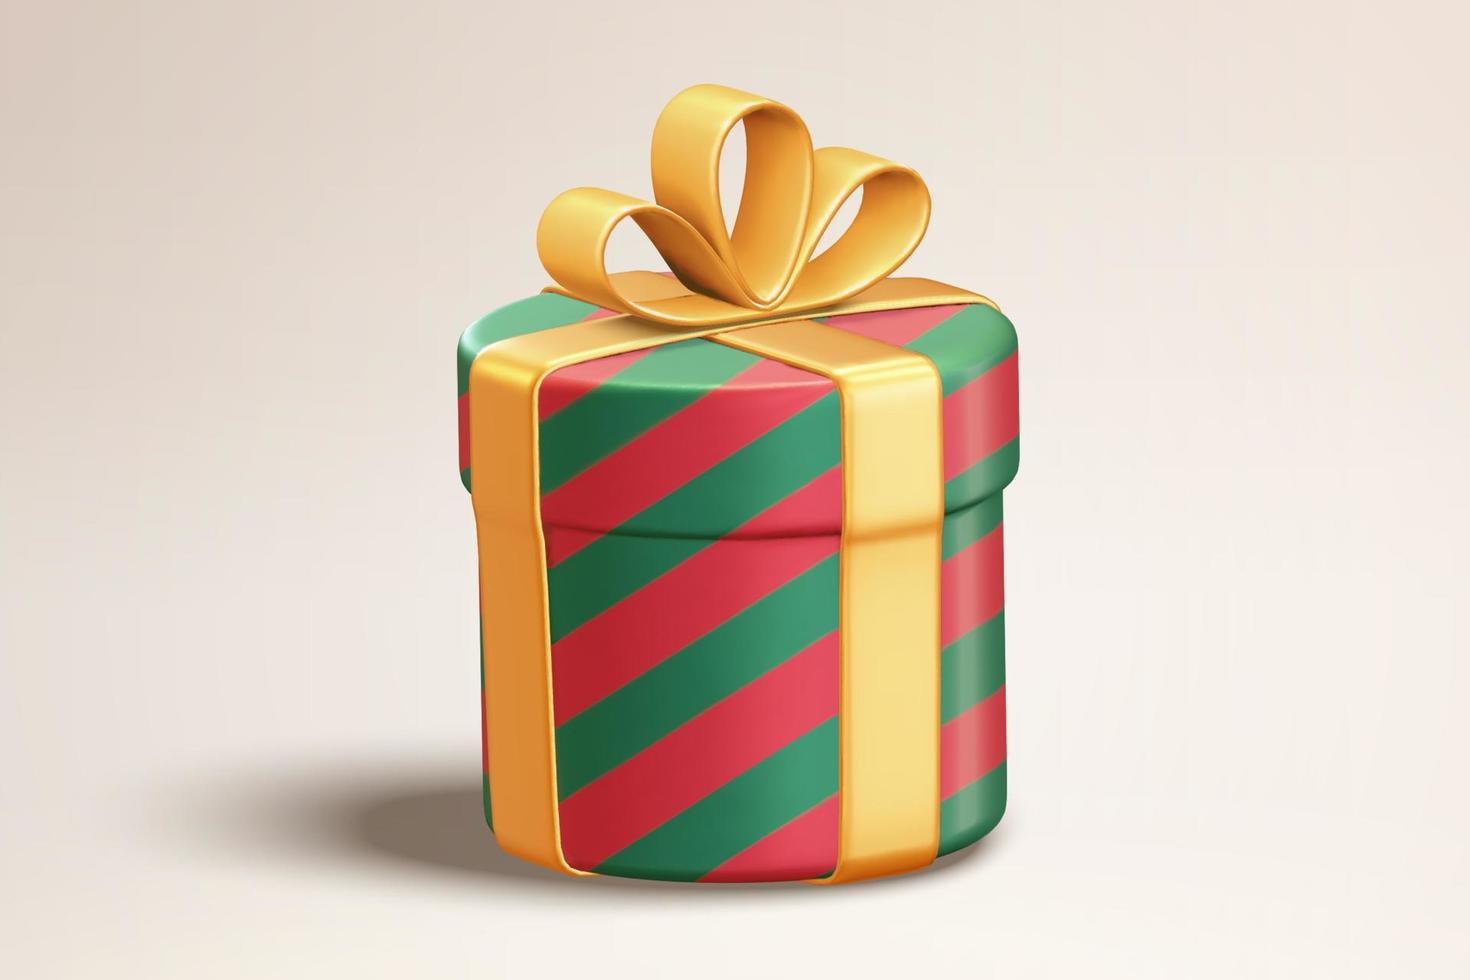 3d wrrapped Christmas present. Illustration of green and red cylindrical gift box with golden bow on an empty background vector